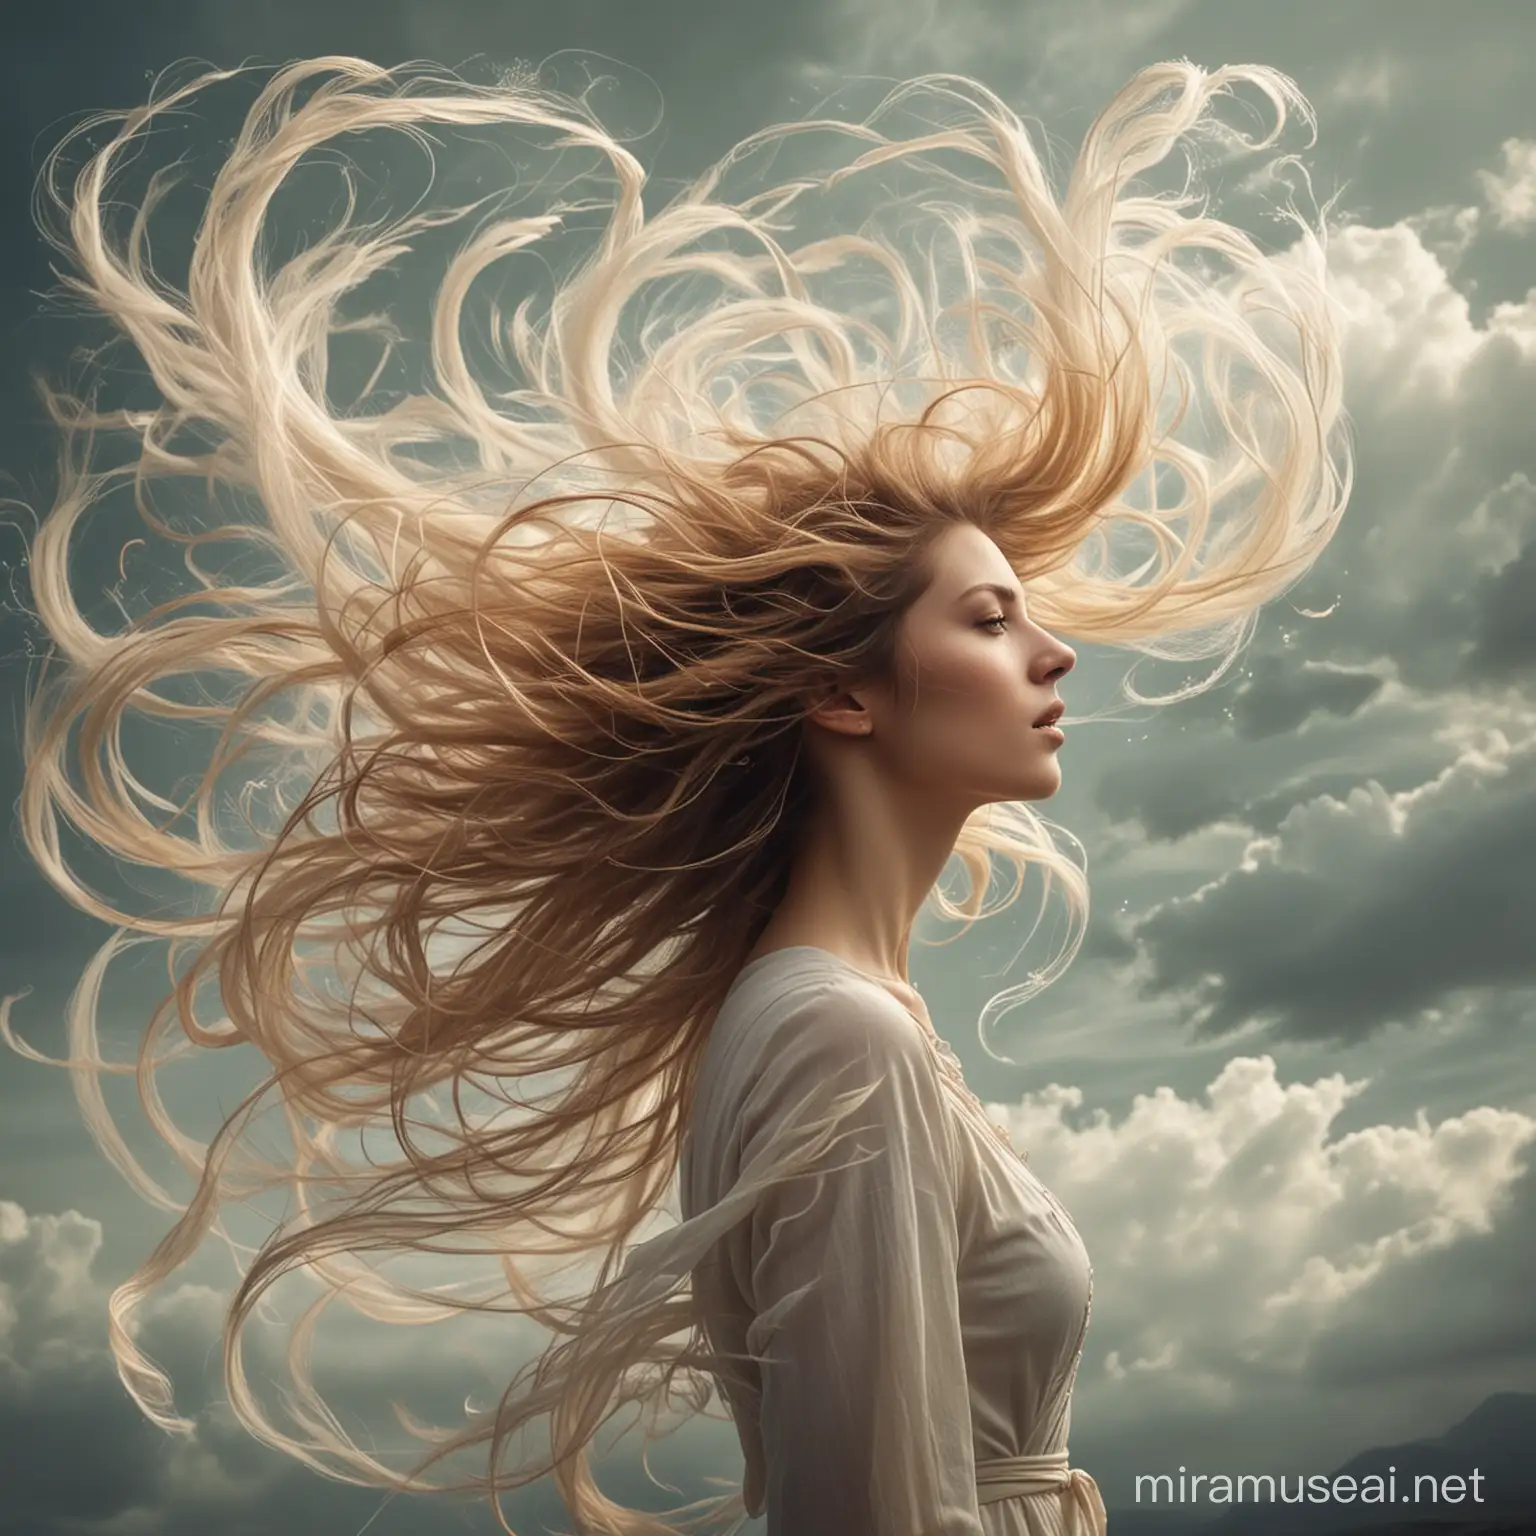 Whispers of Wind Ethereal Tendrils in the Air